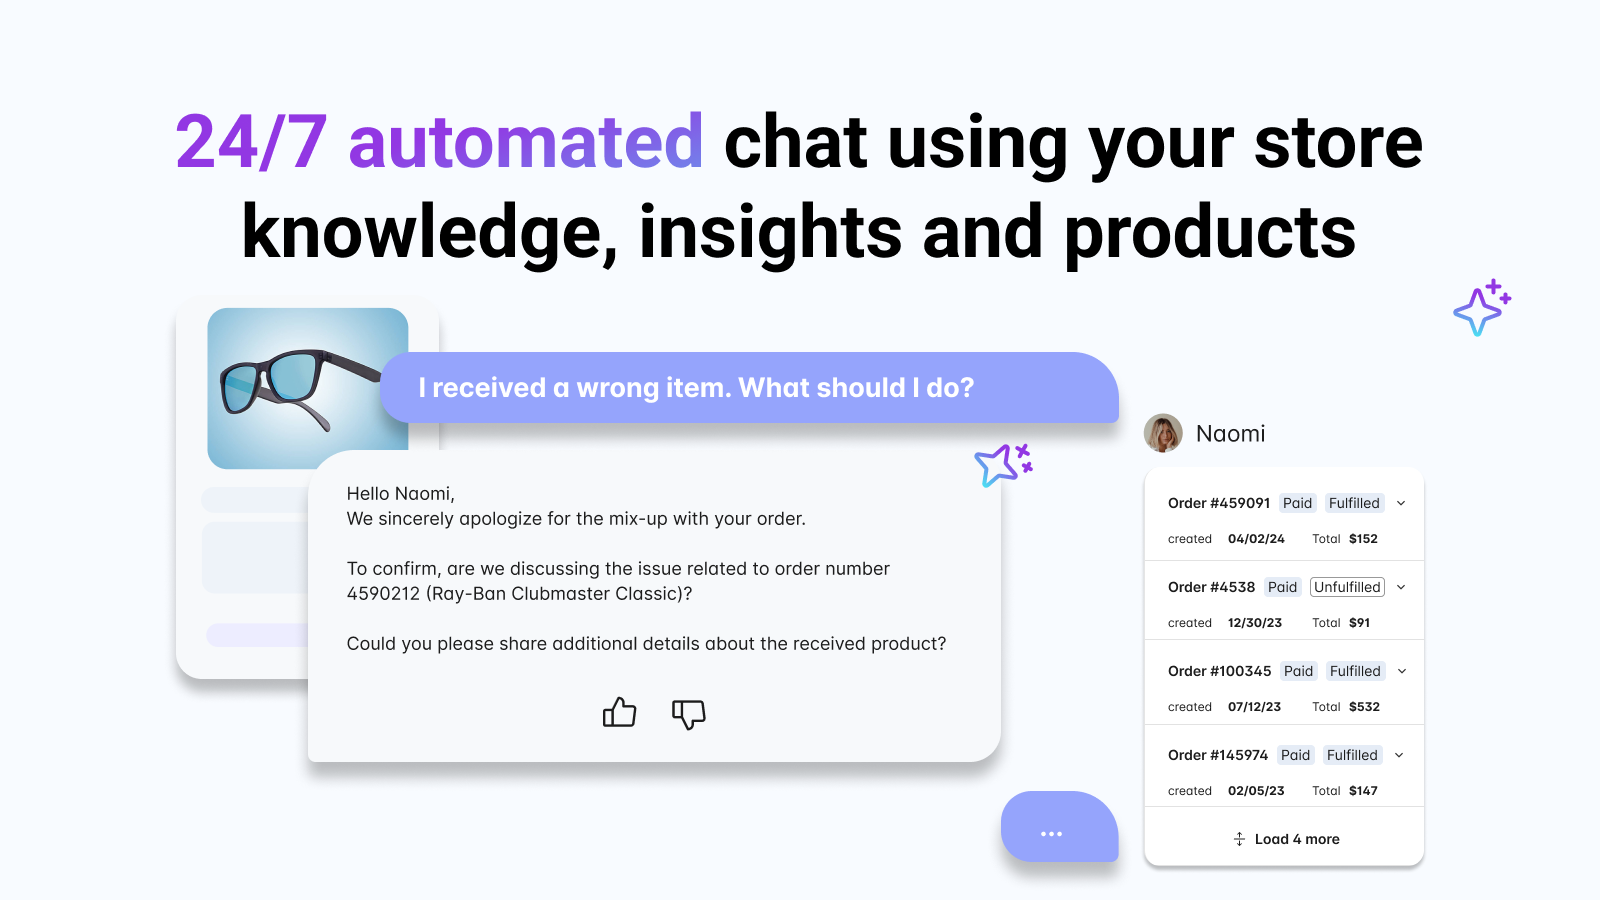 24/7 automated chat - using your store knowledge and products